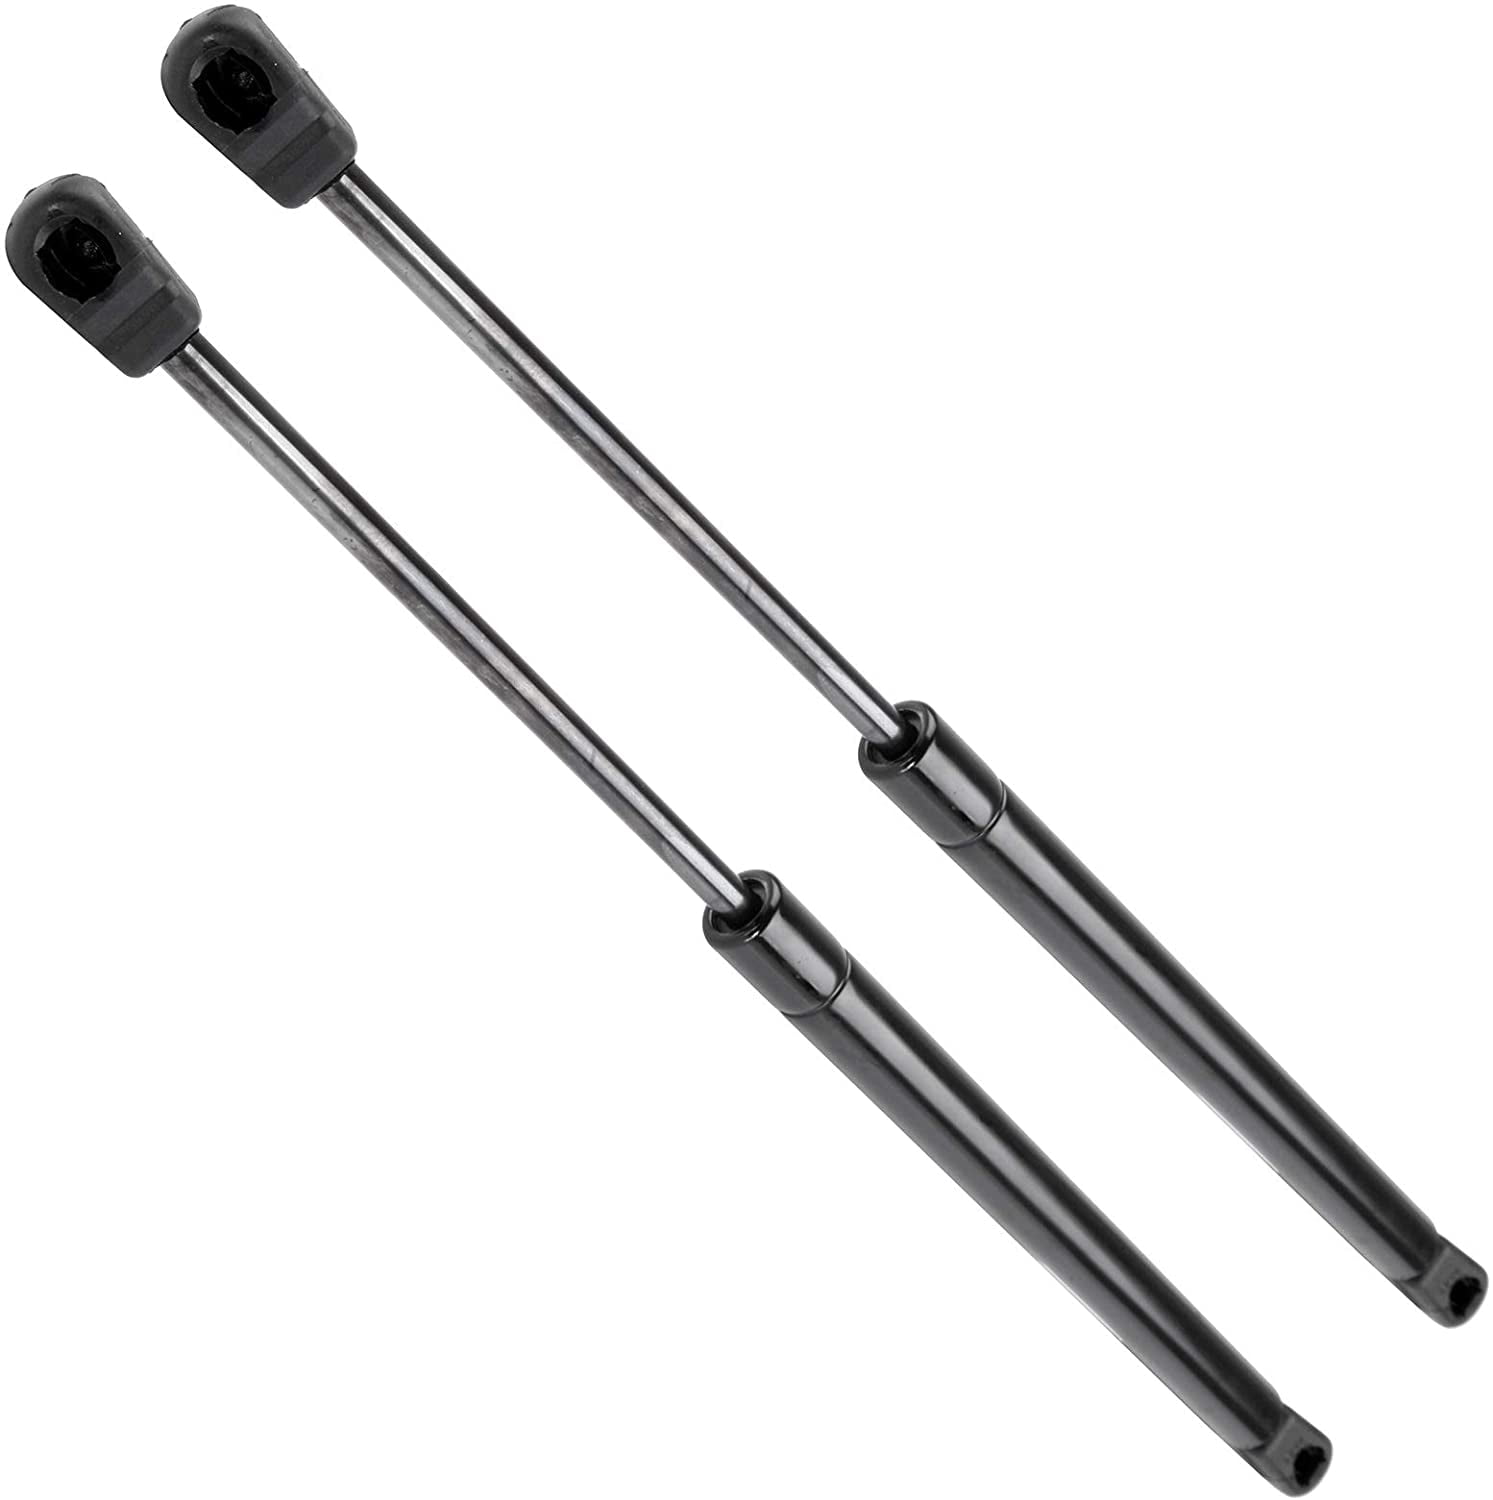 Set of 2 Front Hood Gas Lift Supports Struts Shocks Springs Props Dampers for 2009 To 2014 Acura TL 